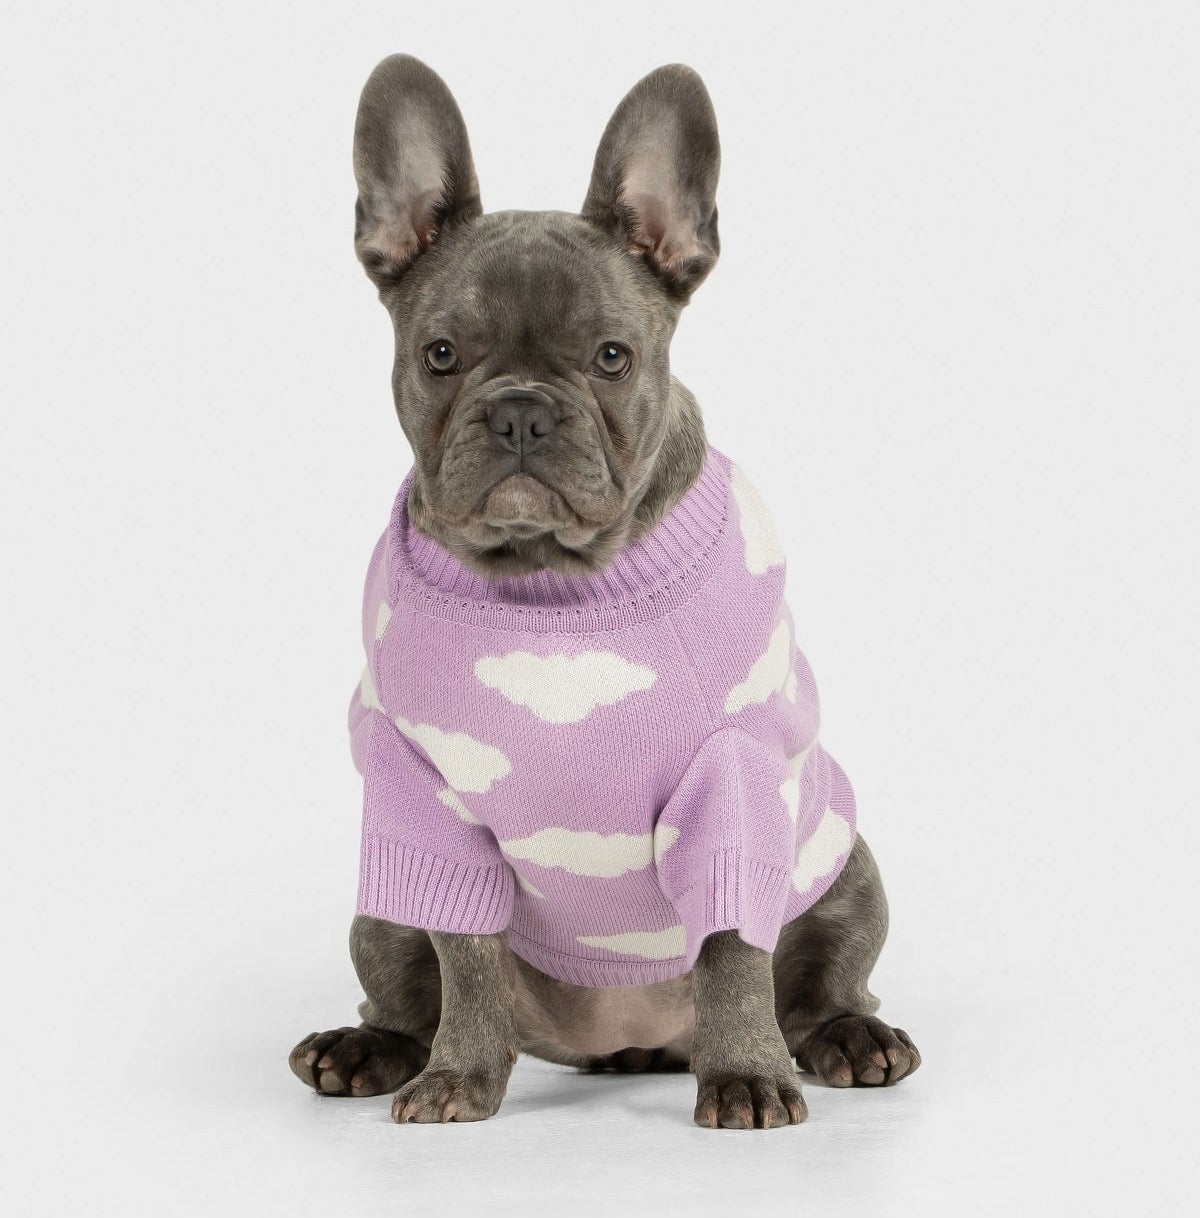 french bulldog in a lavender sweater with white clouds on it